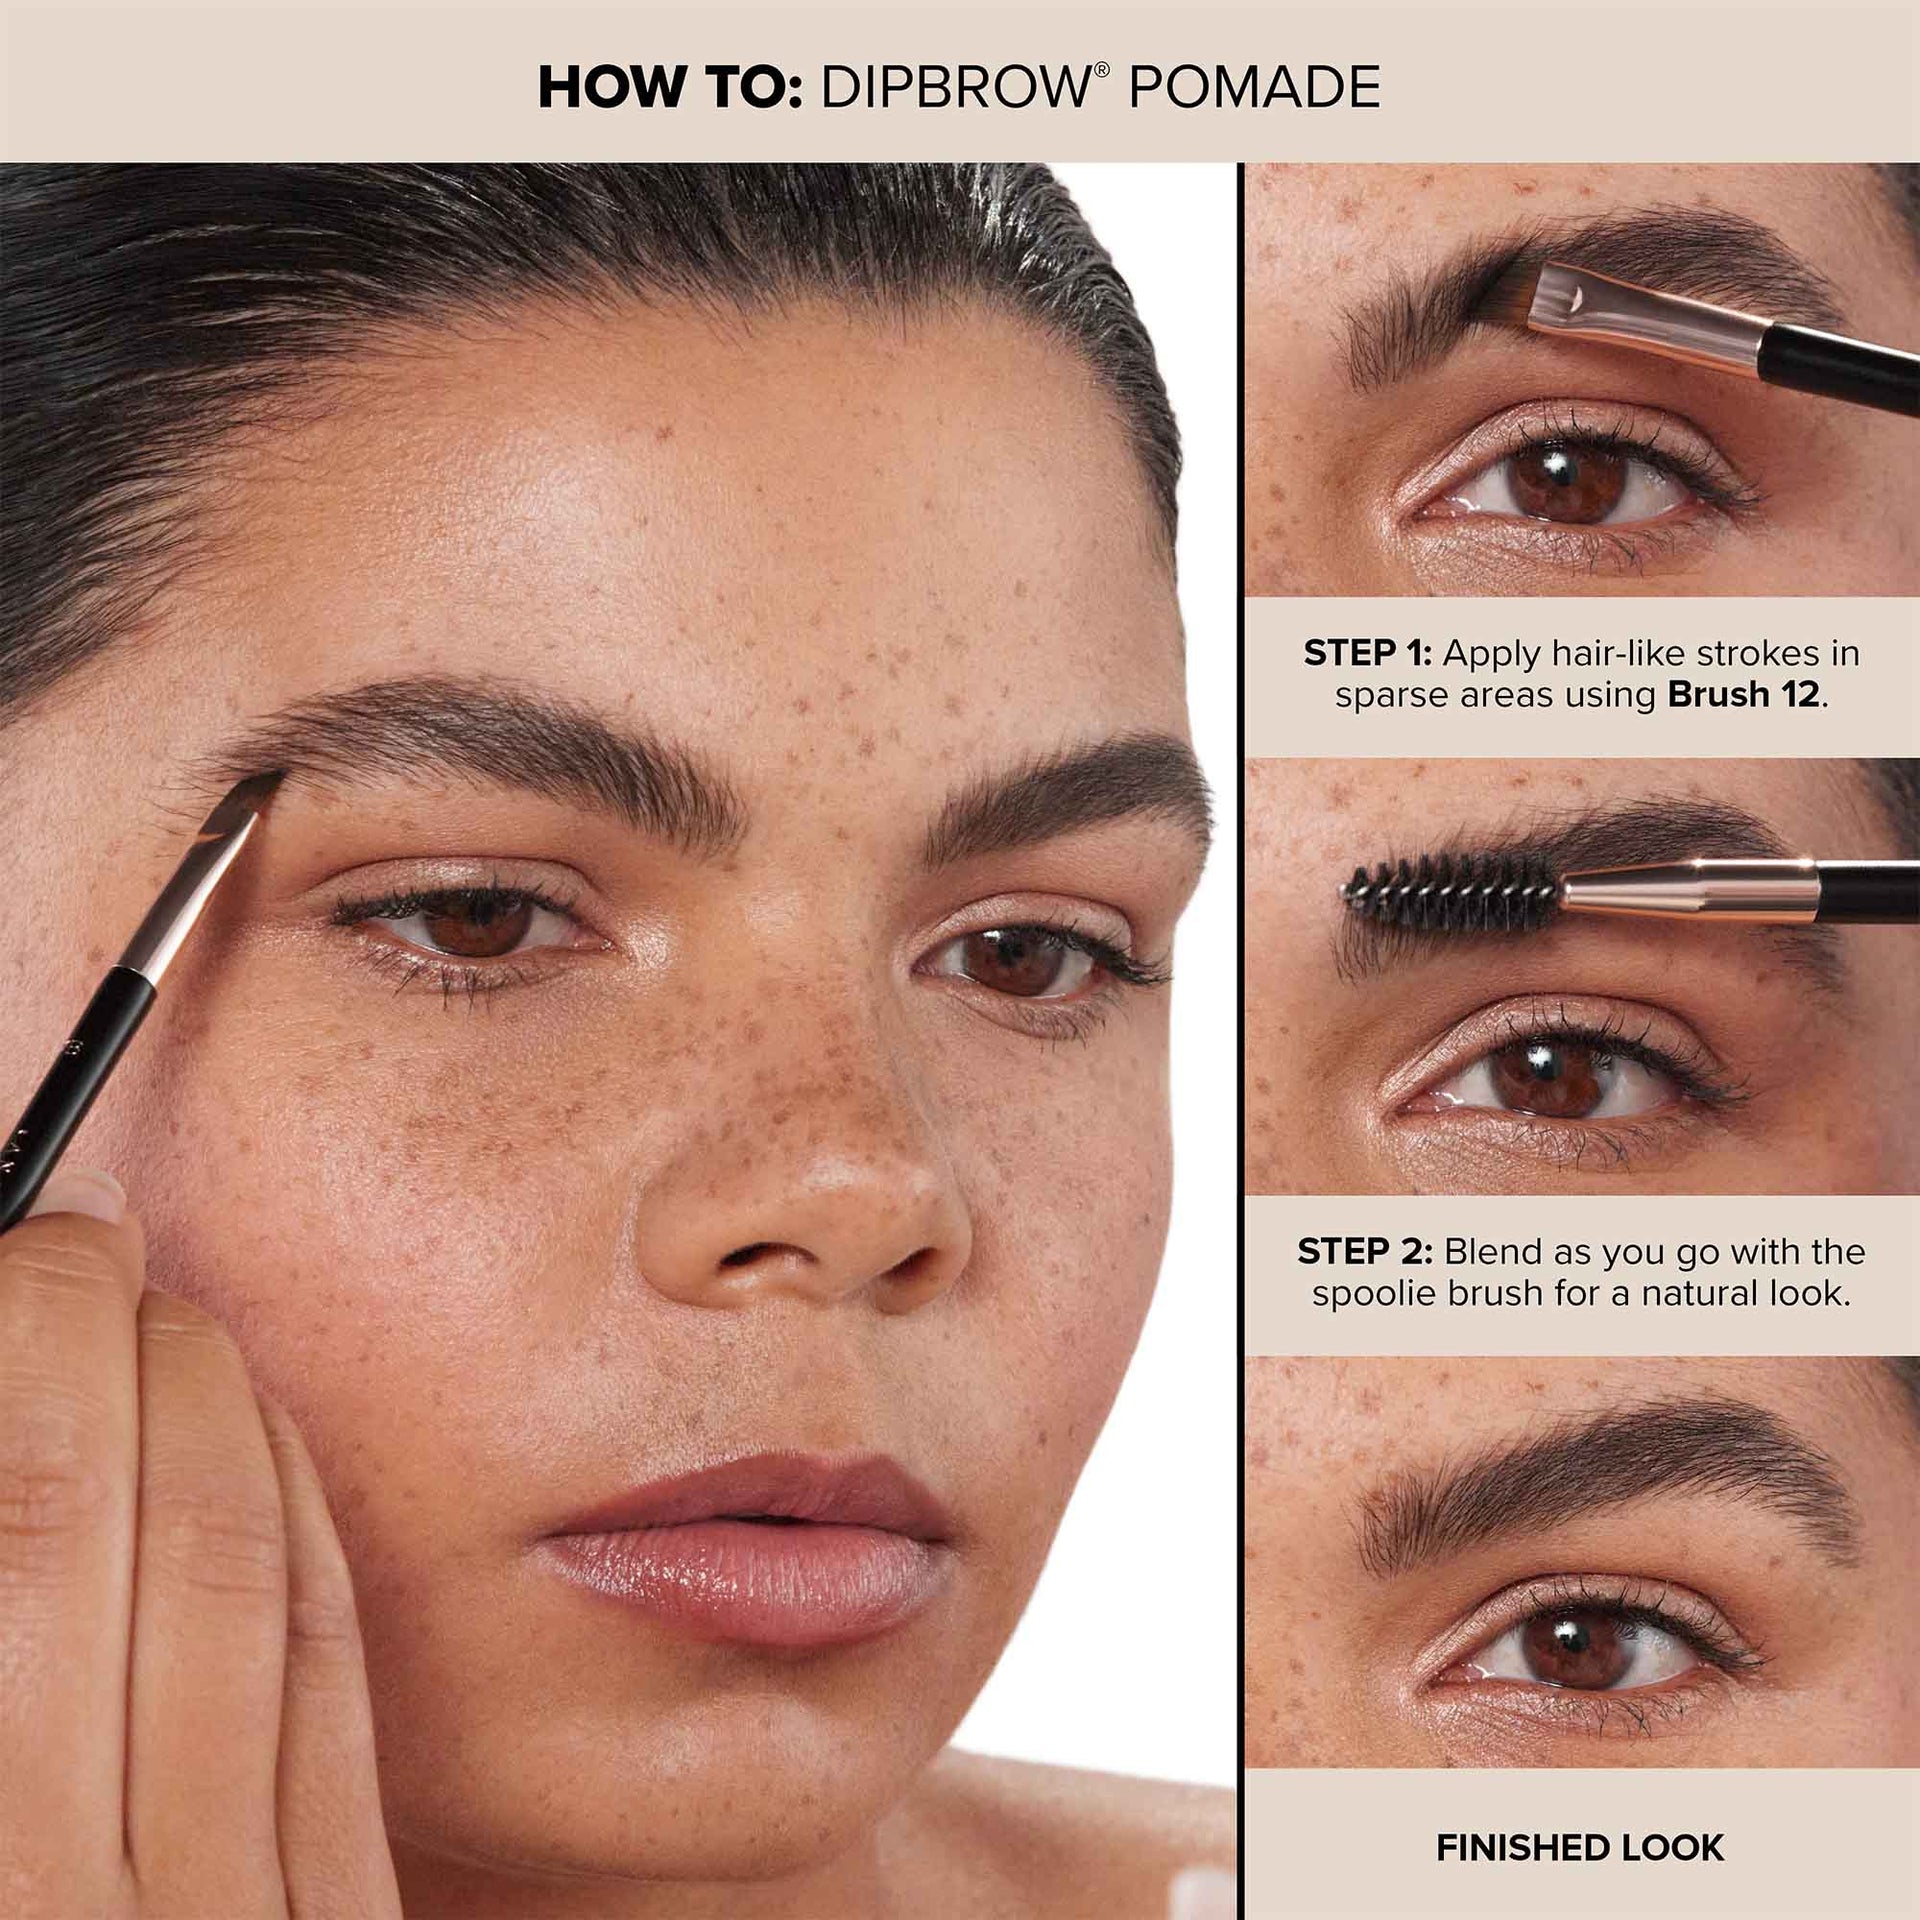 How To Dipbrow Pomade 